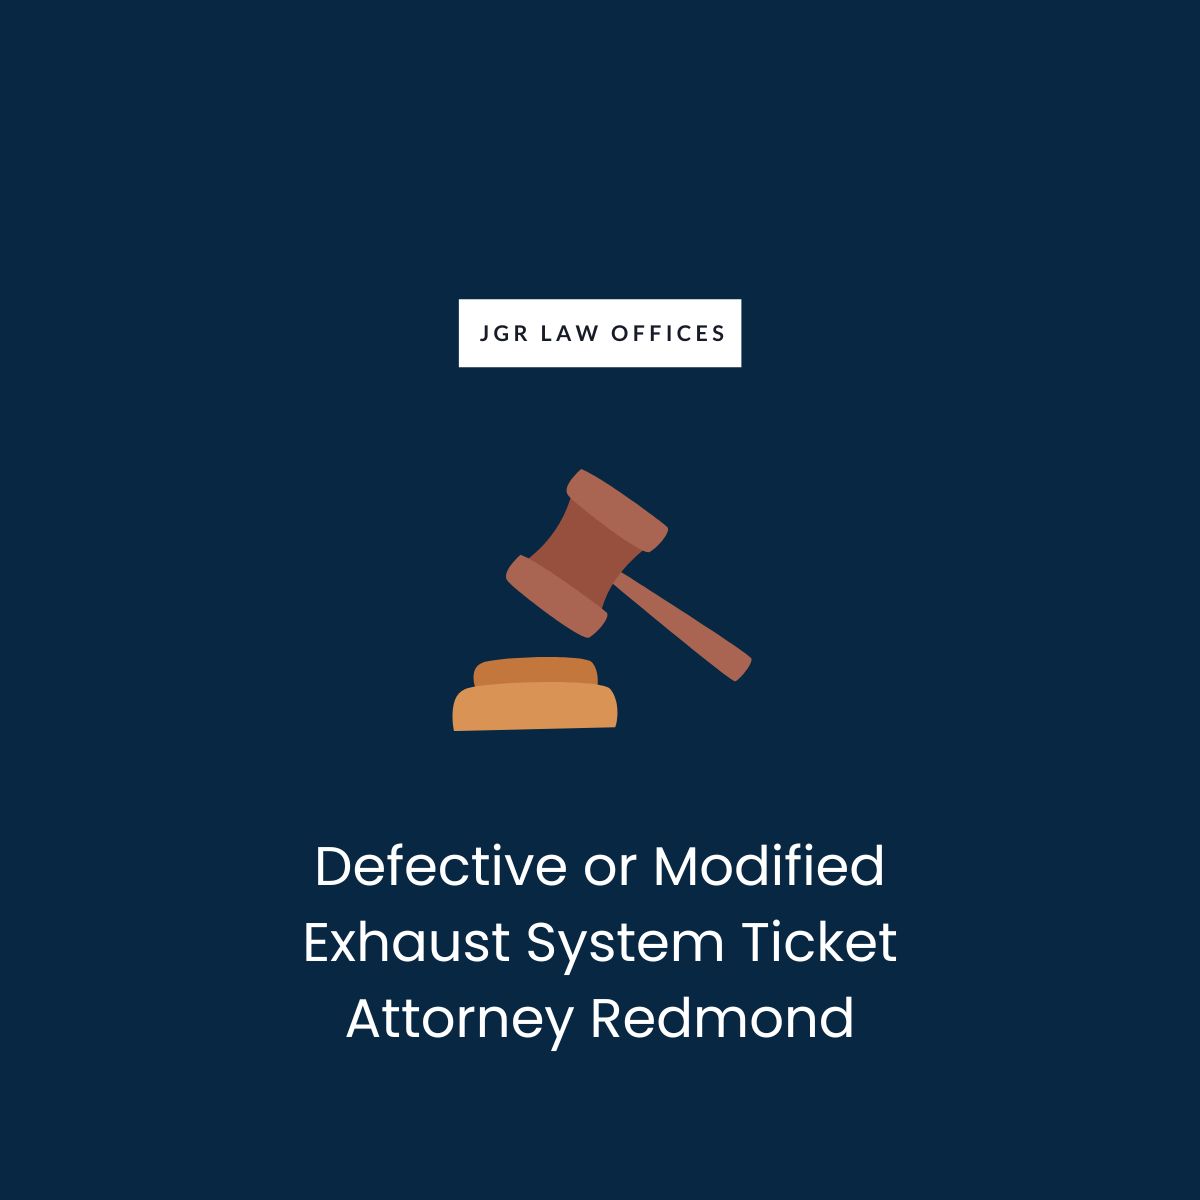 Defective or Modified Exhaust System Ticket Attorney Redmond